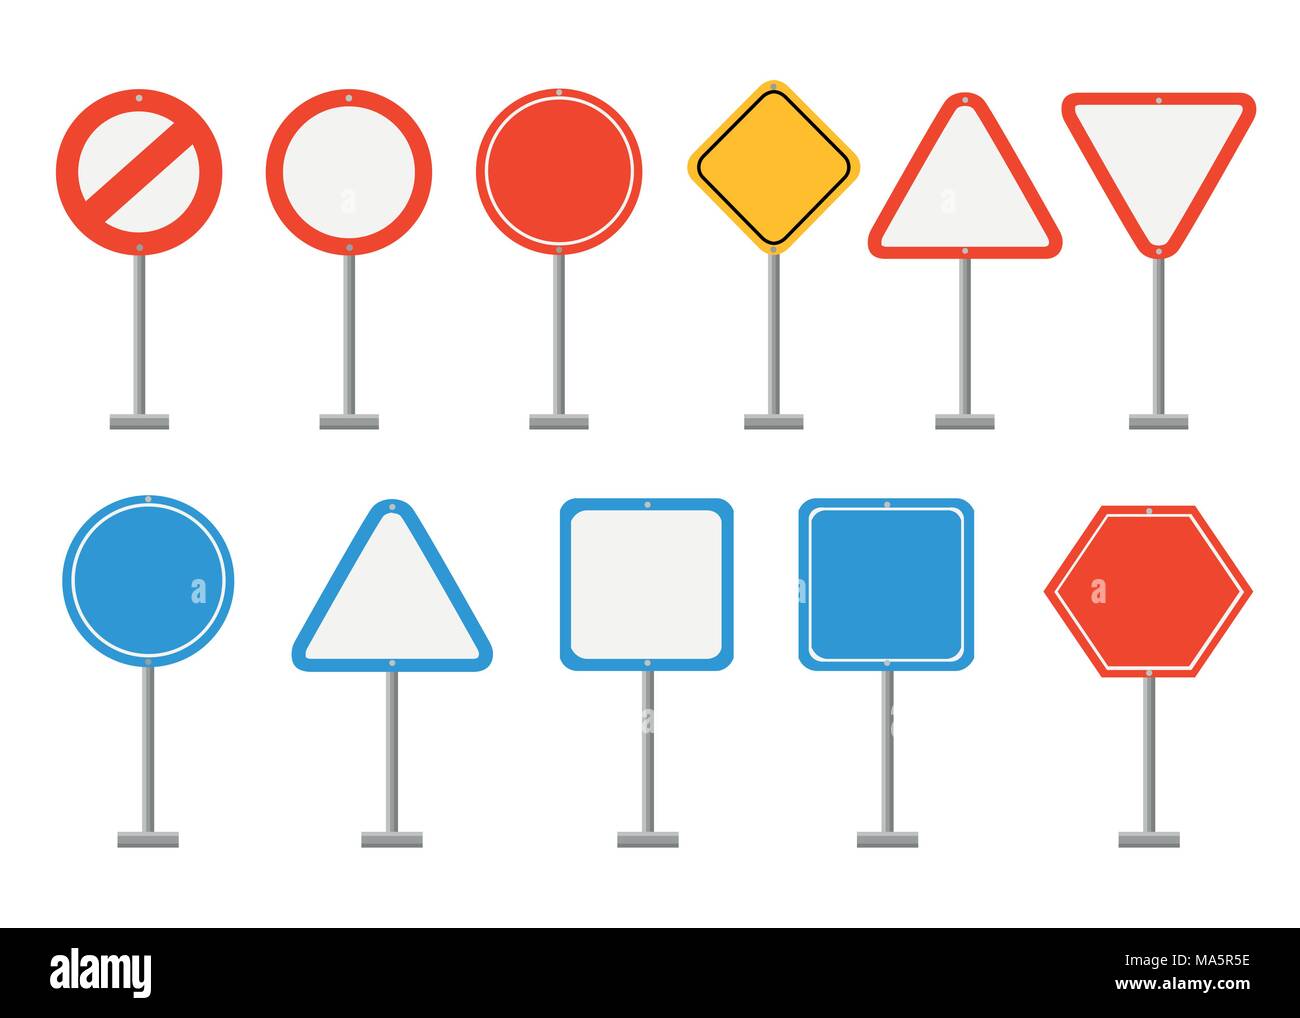 Set of road signs. Road signs with place for your symbols or picture. Vector illustration isolated on white background. Website page and mobile app de Stock Vector